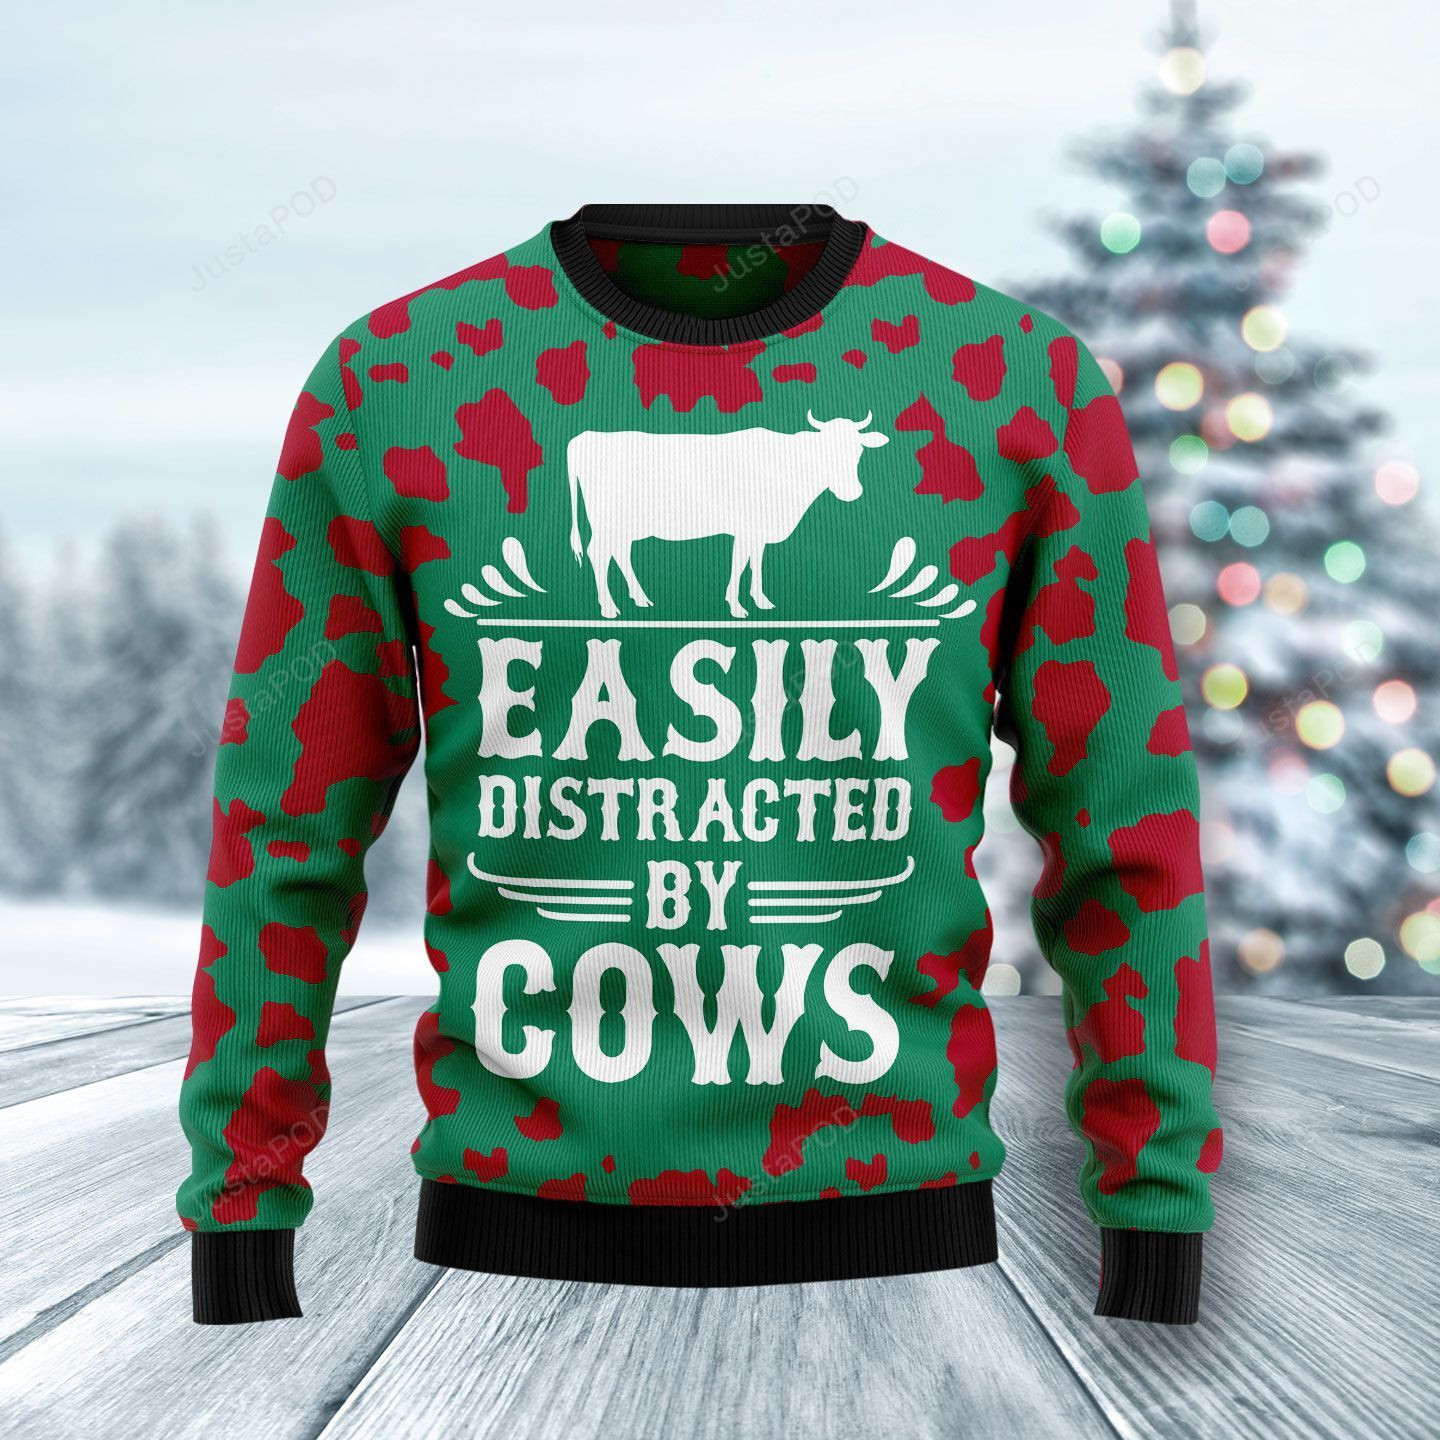 Easily Distracted By Cows Ugly Christmas Sweater All Over Print